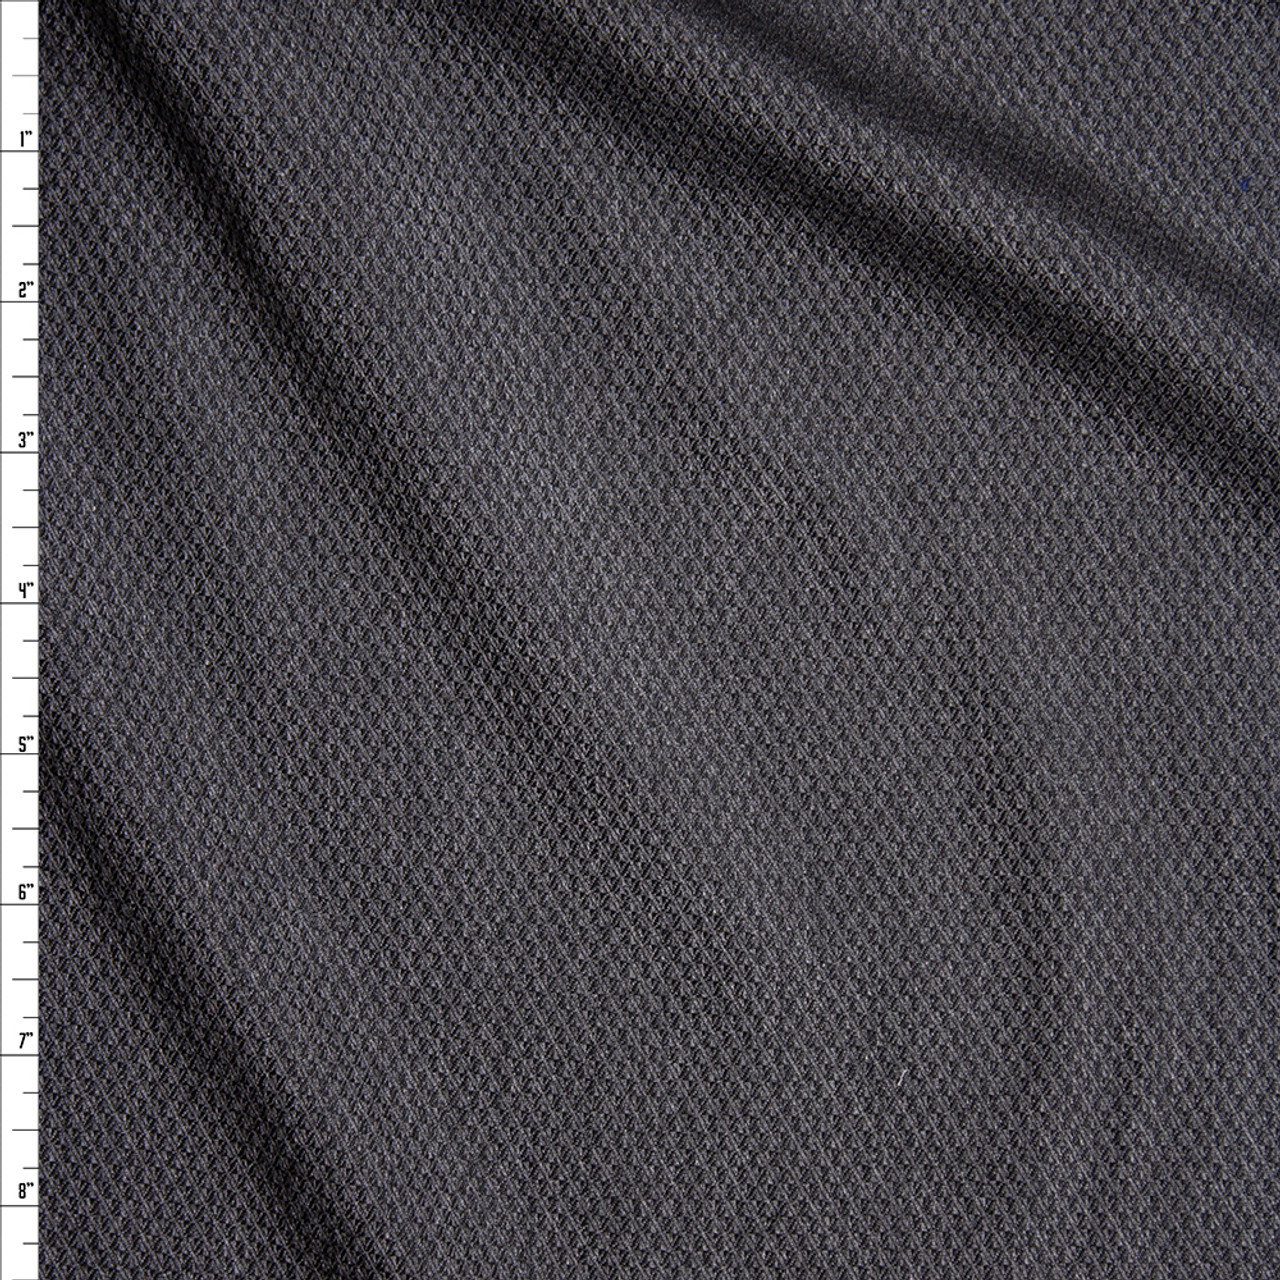 Cali Fabrics Charcoal Textured Suiting Fabric by the Yard